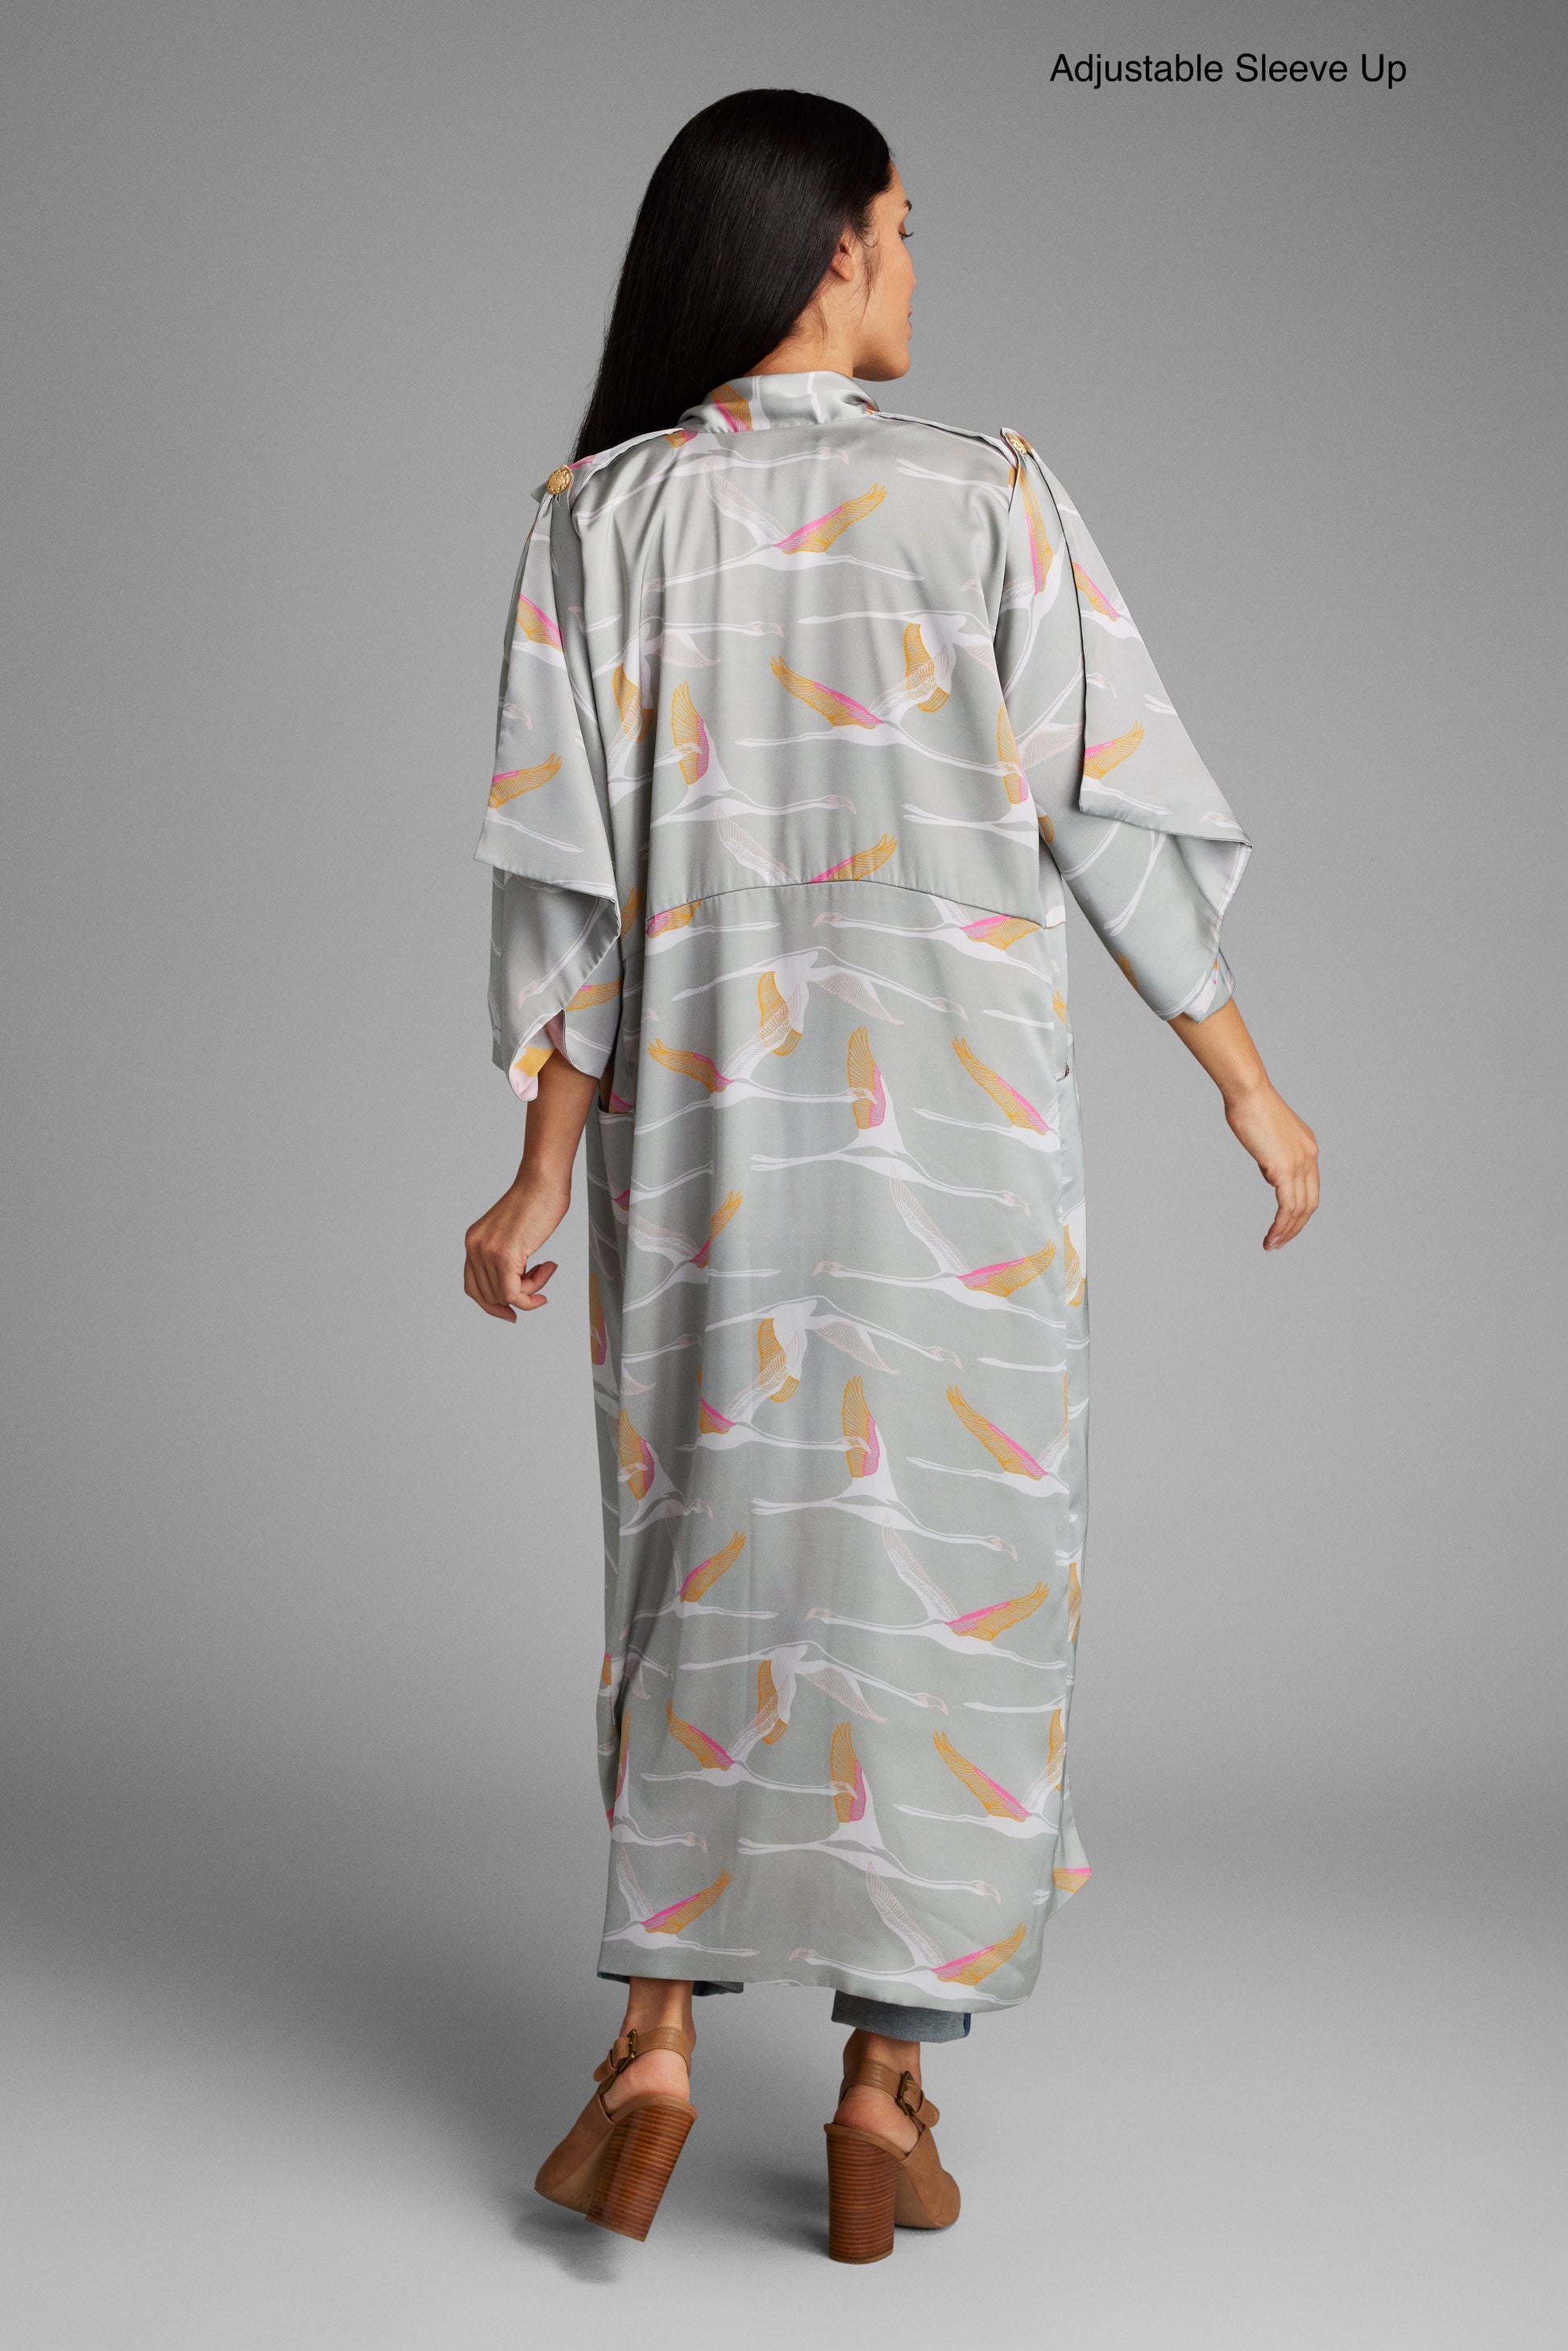 Back profile view of woman wearing a grey pink and gold colored crane print kimono duster made from recycled materials 2